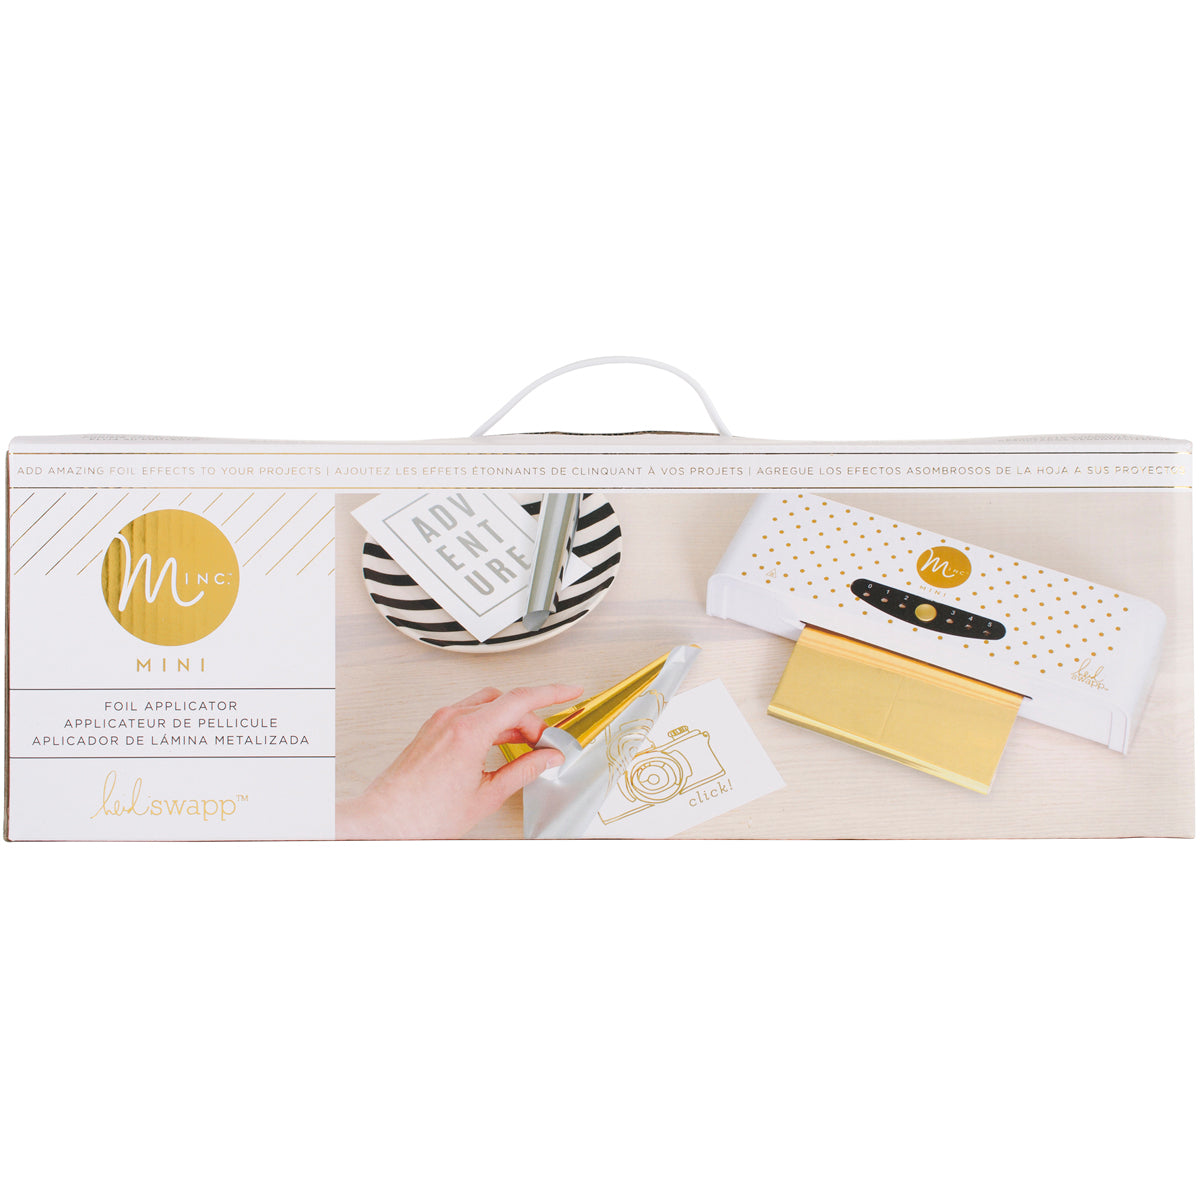 The Foil Factory: 3 Tips For Using Your MINC Foil Applicator